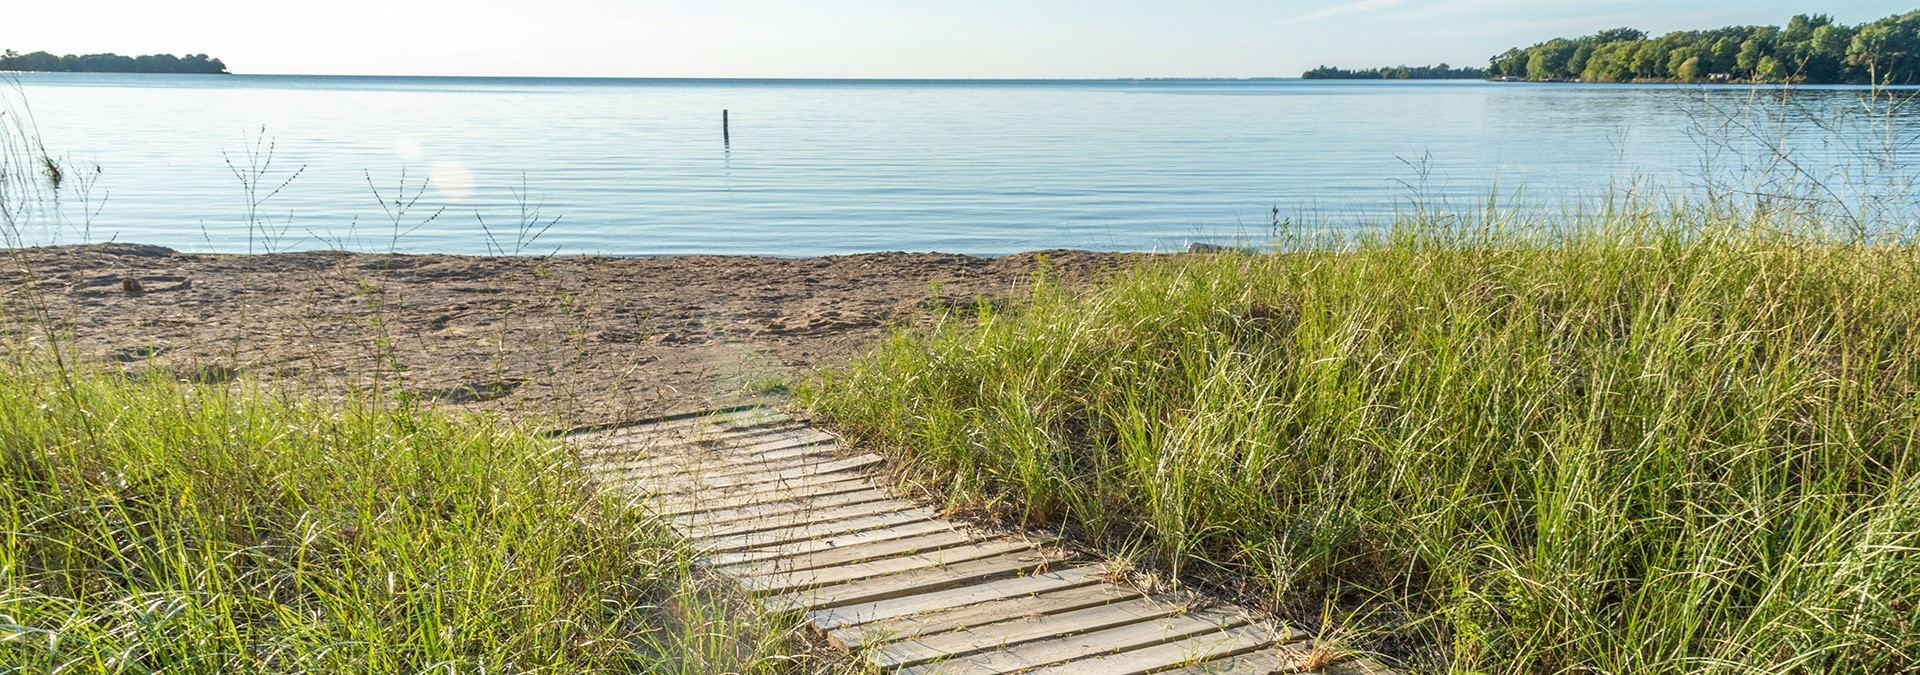 Grass-lined wooden walkway leading to the beach and the lake